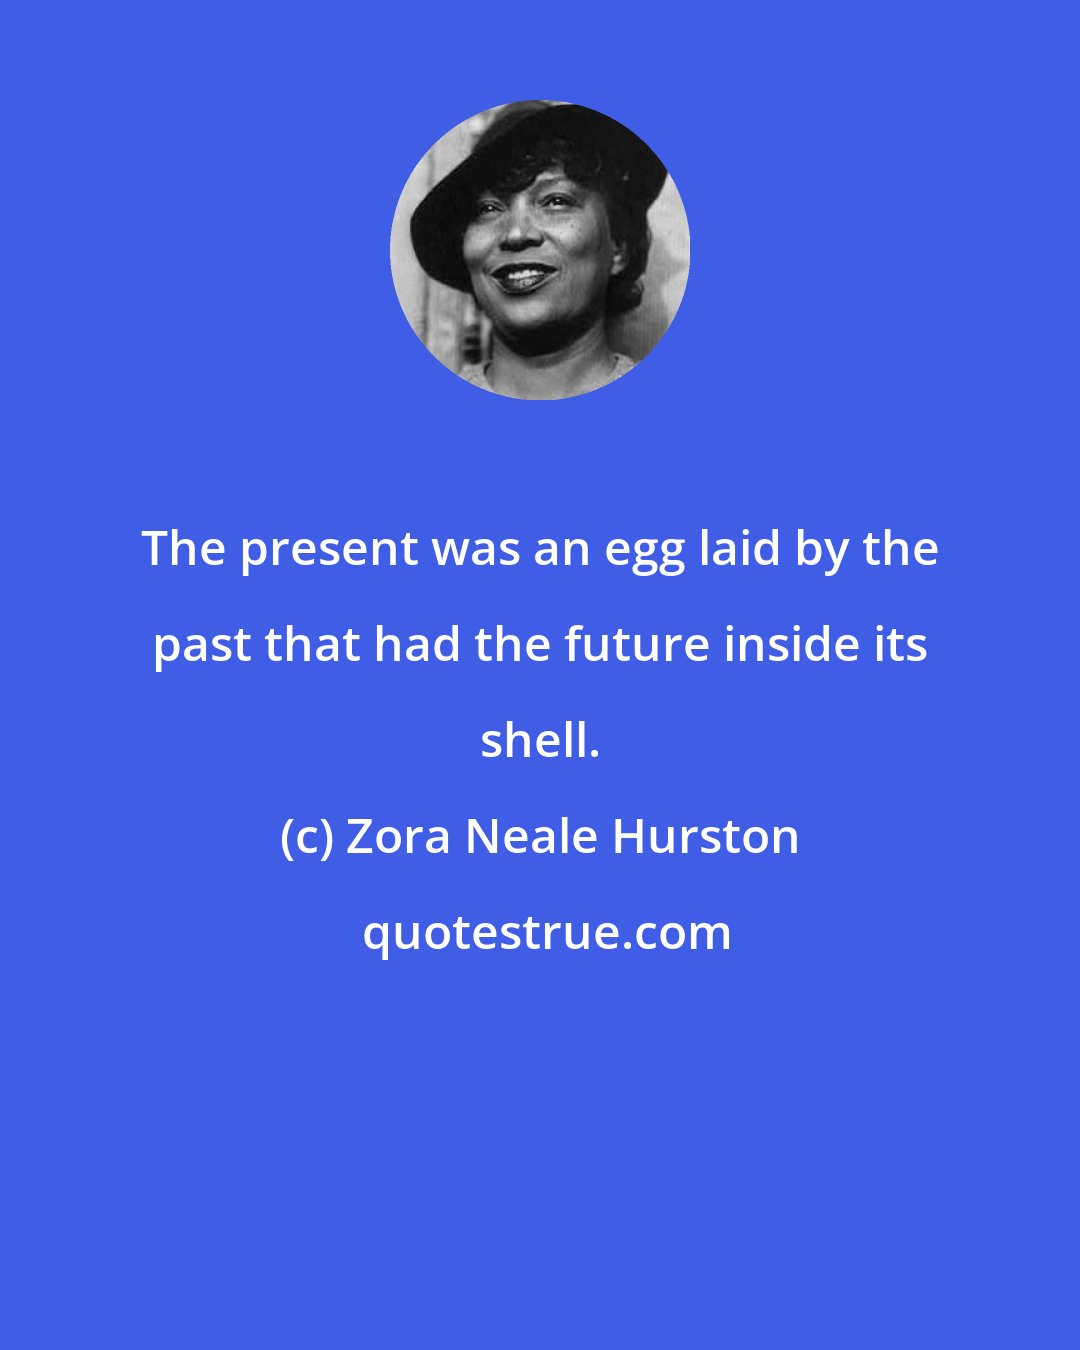 Zora Neale Hurston: The present was an egg laid by the past that had the future inside its shell.